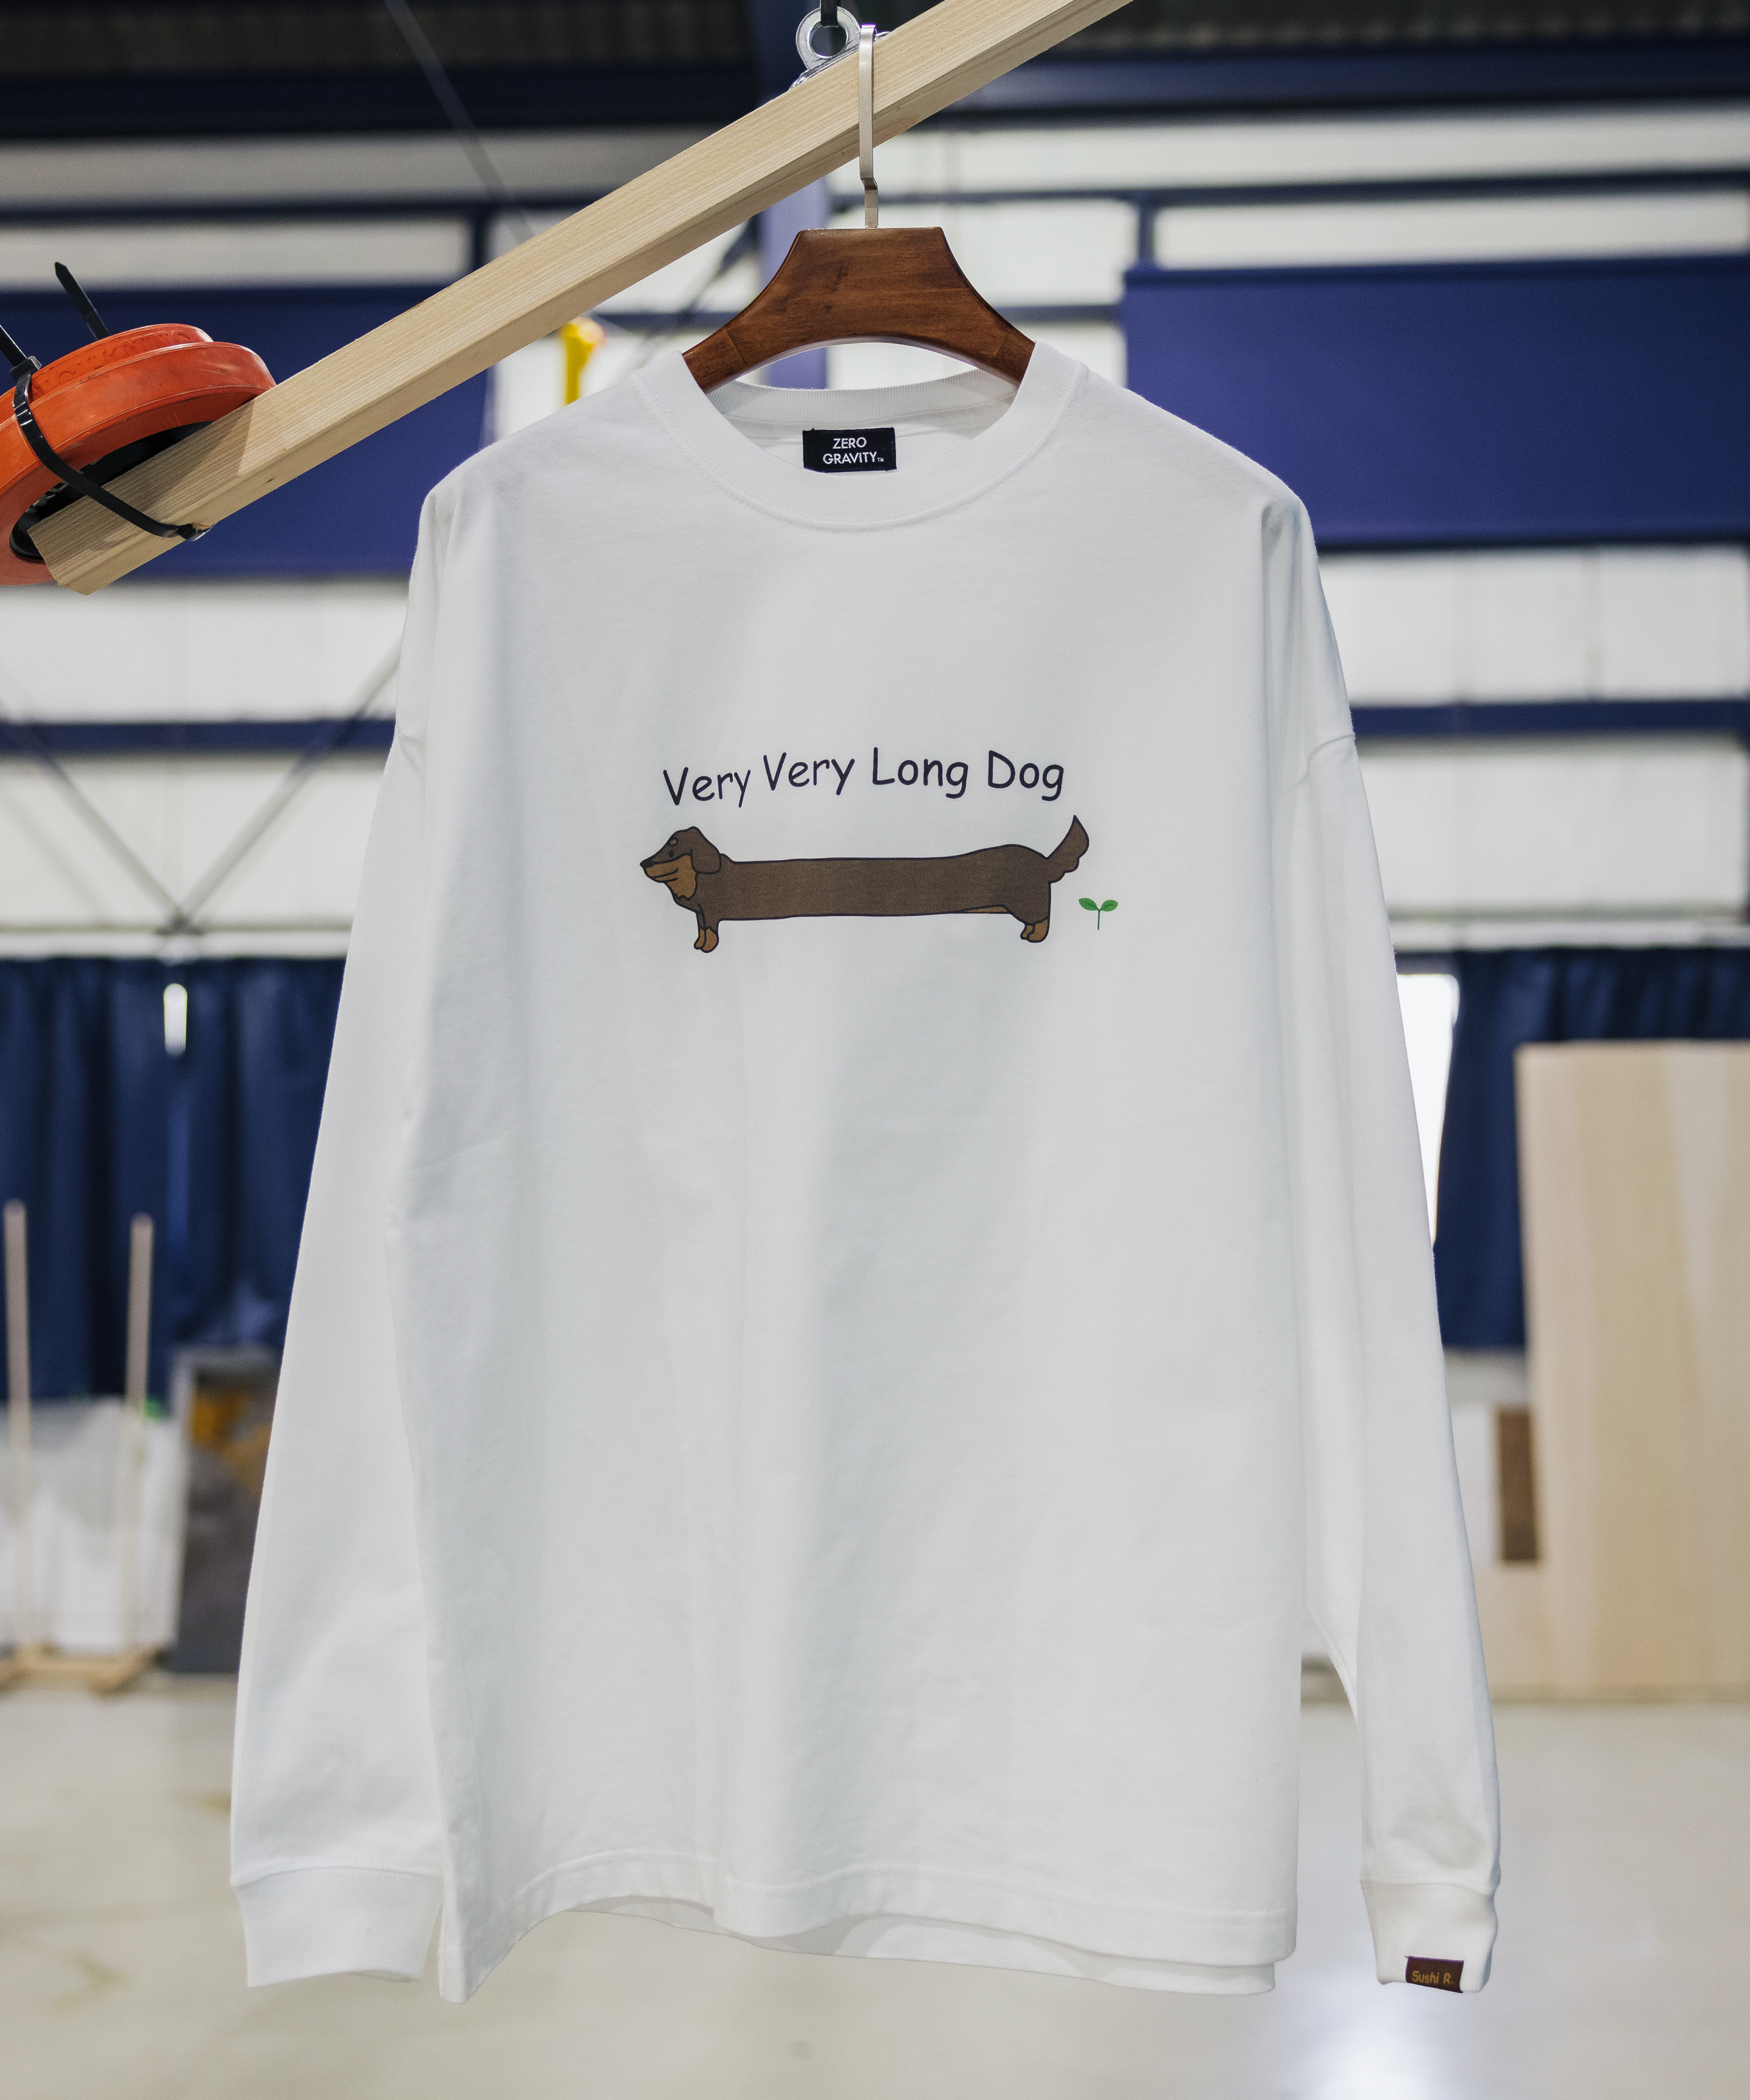 Very Very Long Dog Oversized Ls T Shirt Zero Gravity Official Shop